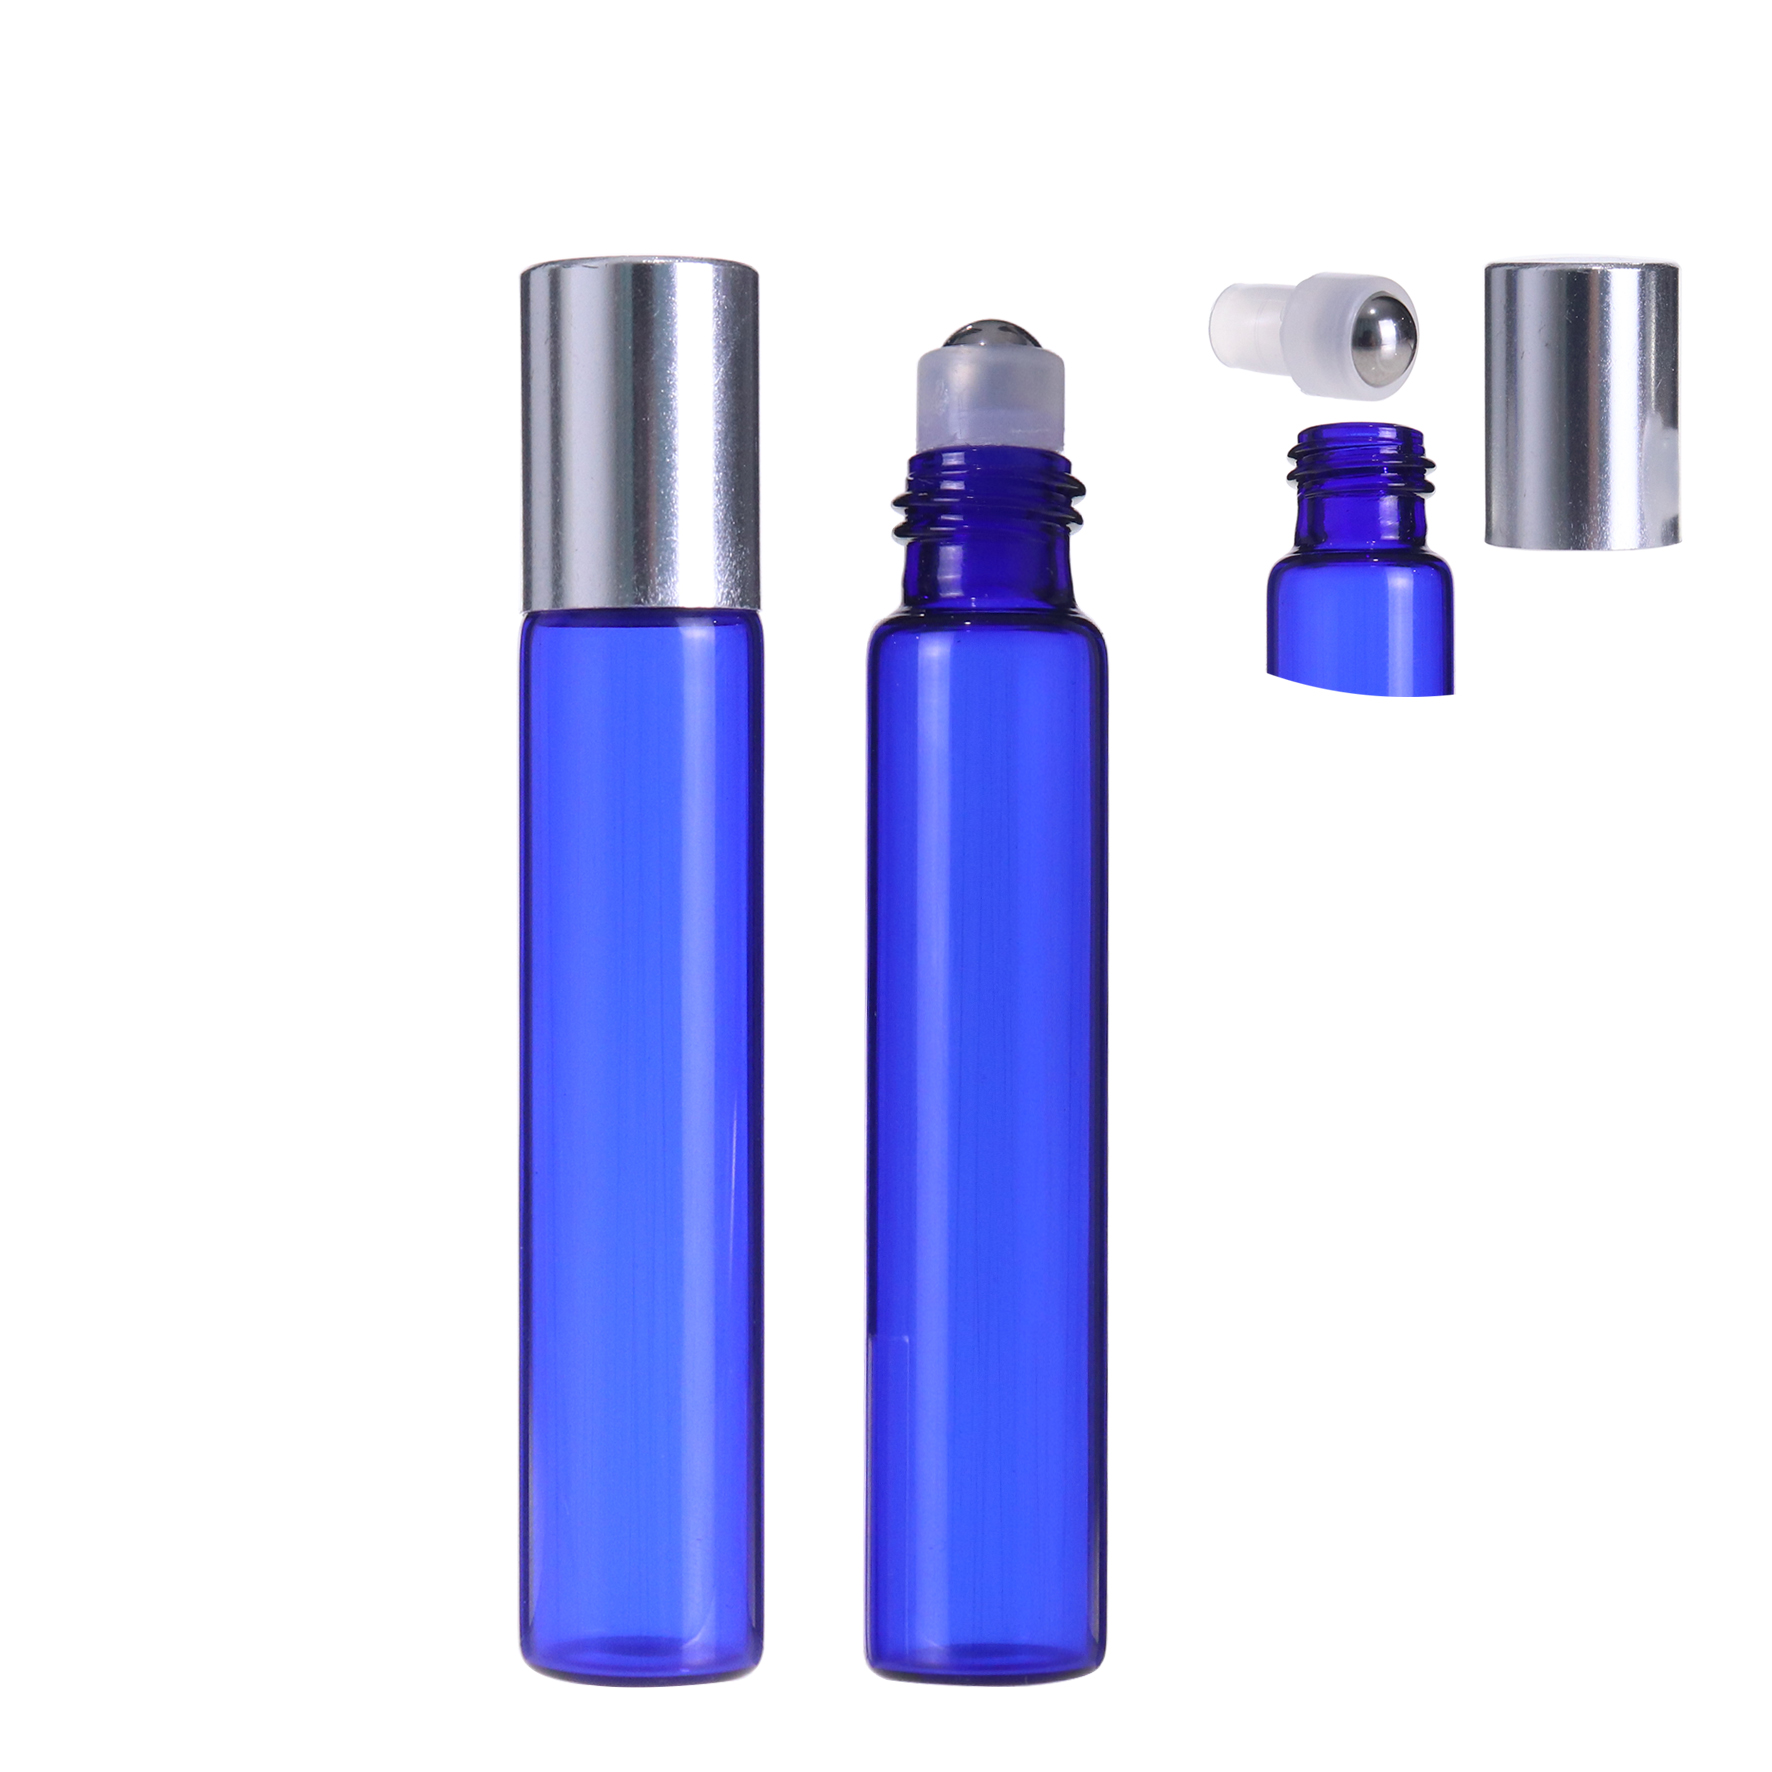 round cosmetic roller bottles 10ml empty blue roll on bottle with ball for essential oil